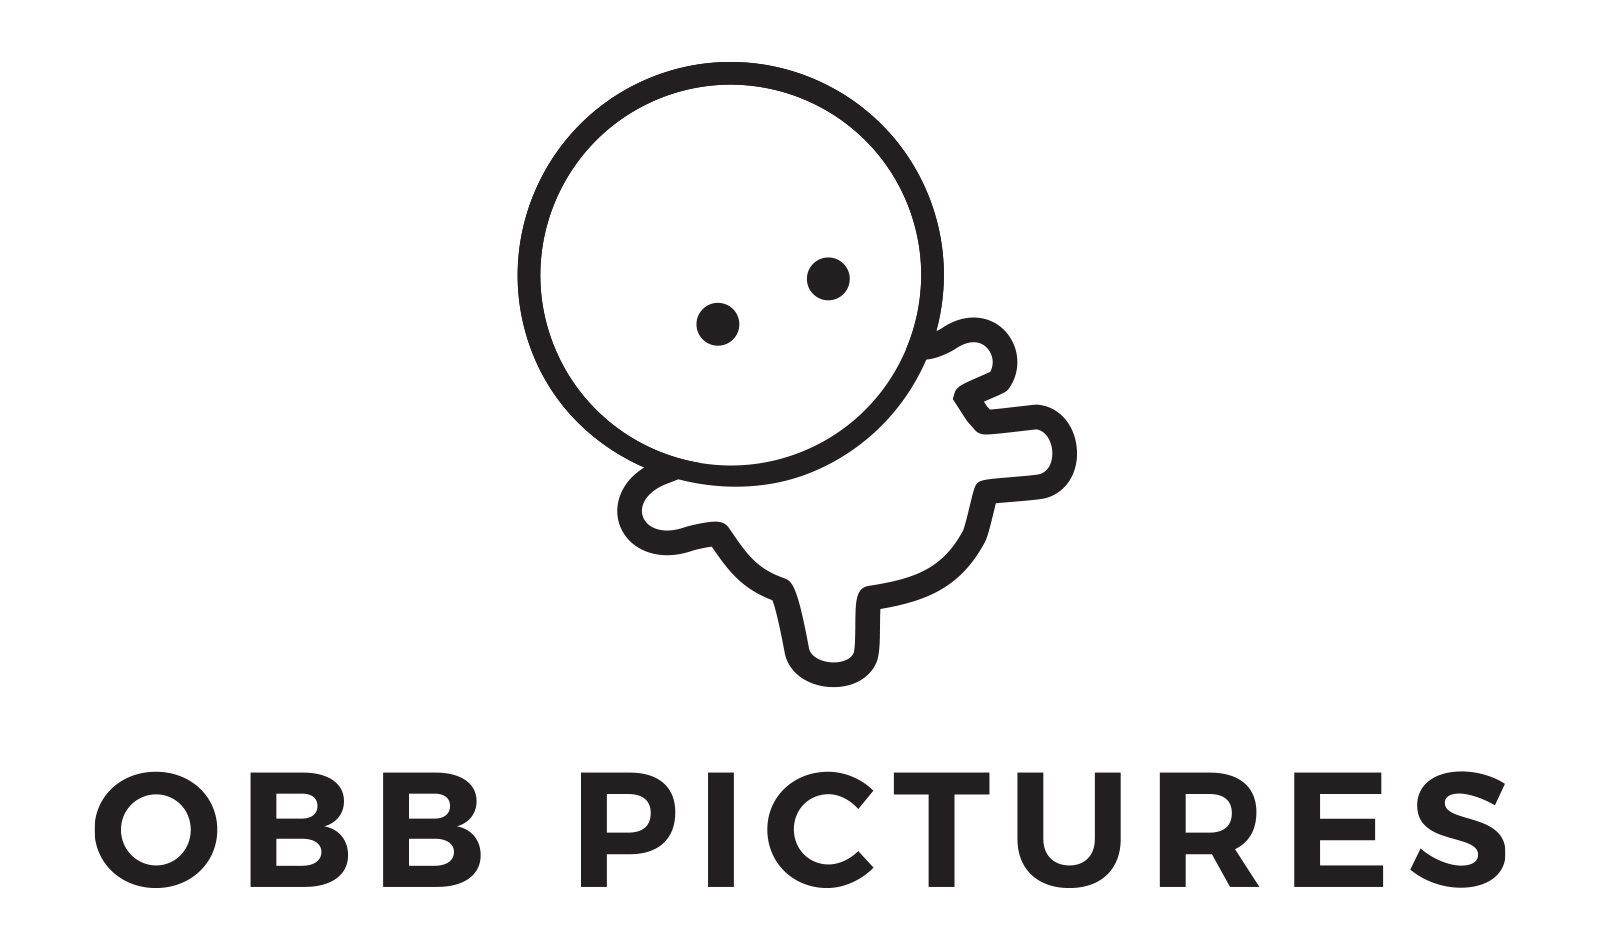 obb-pictures